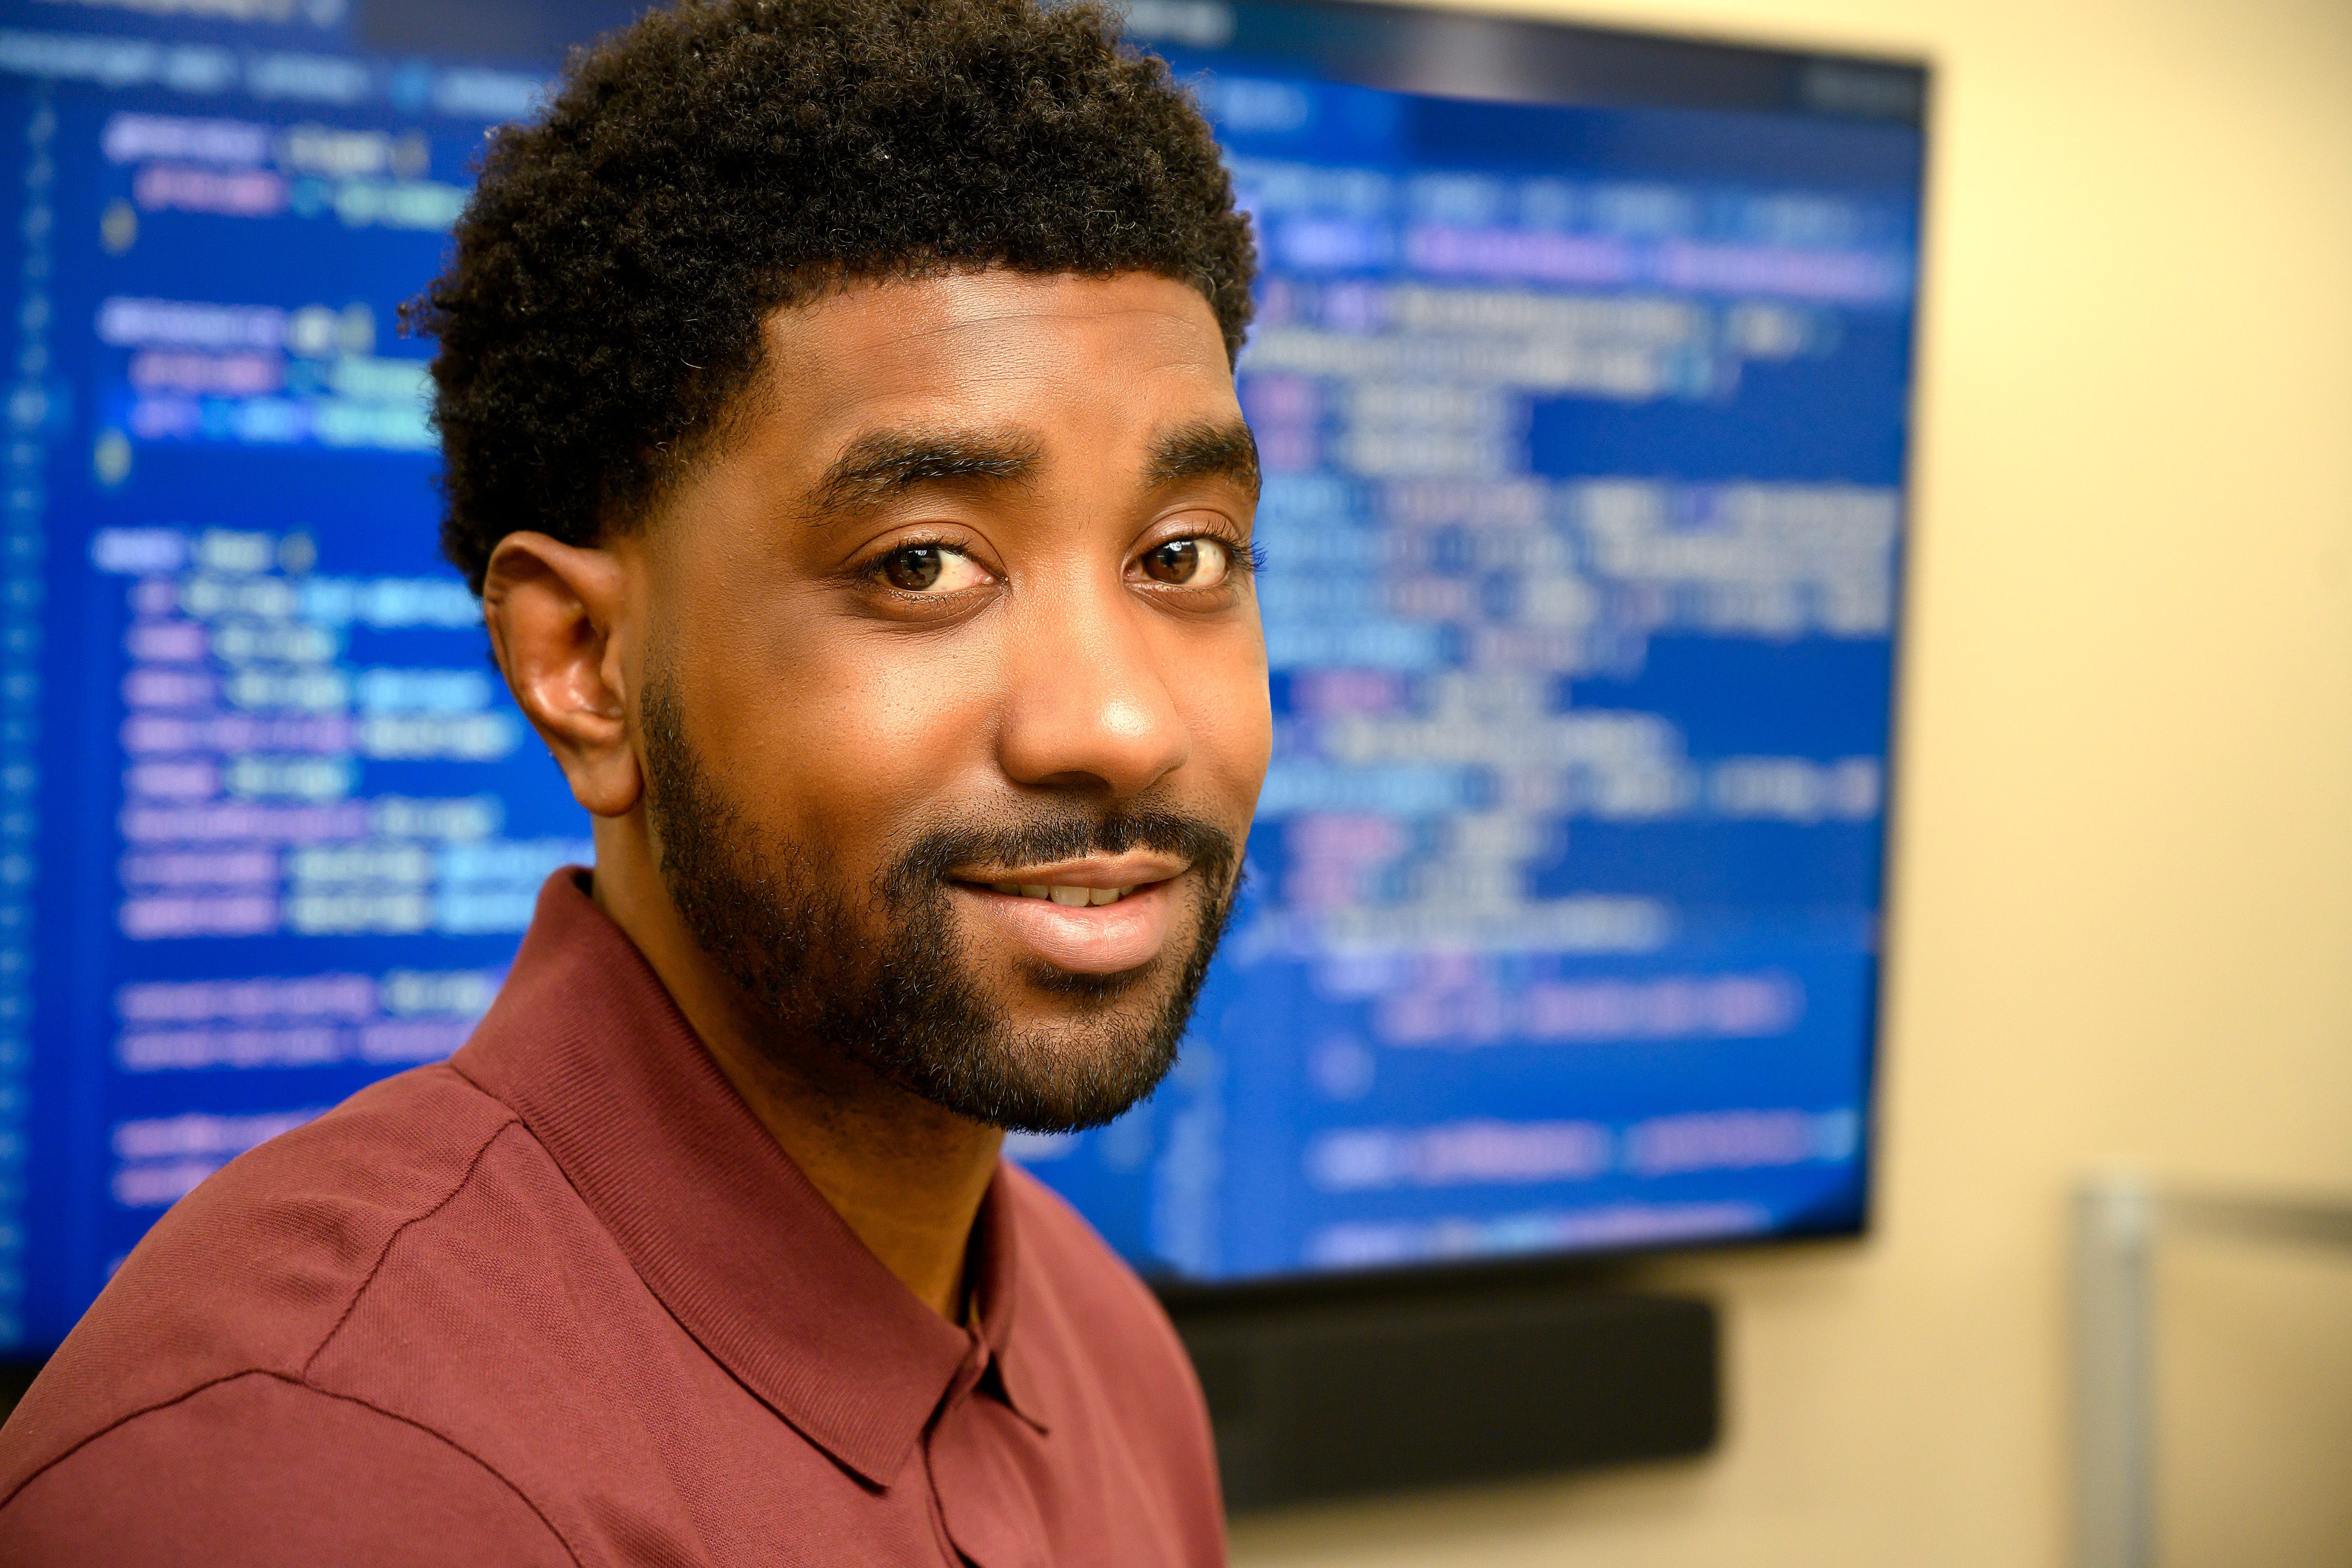 IT leaders turn to HBCUs for future IT talent